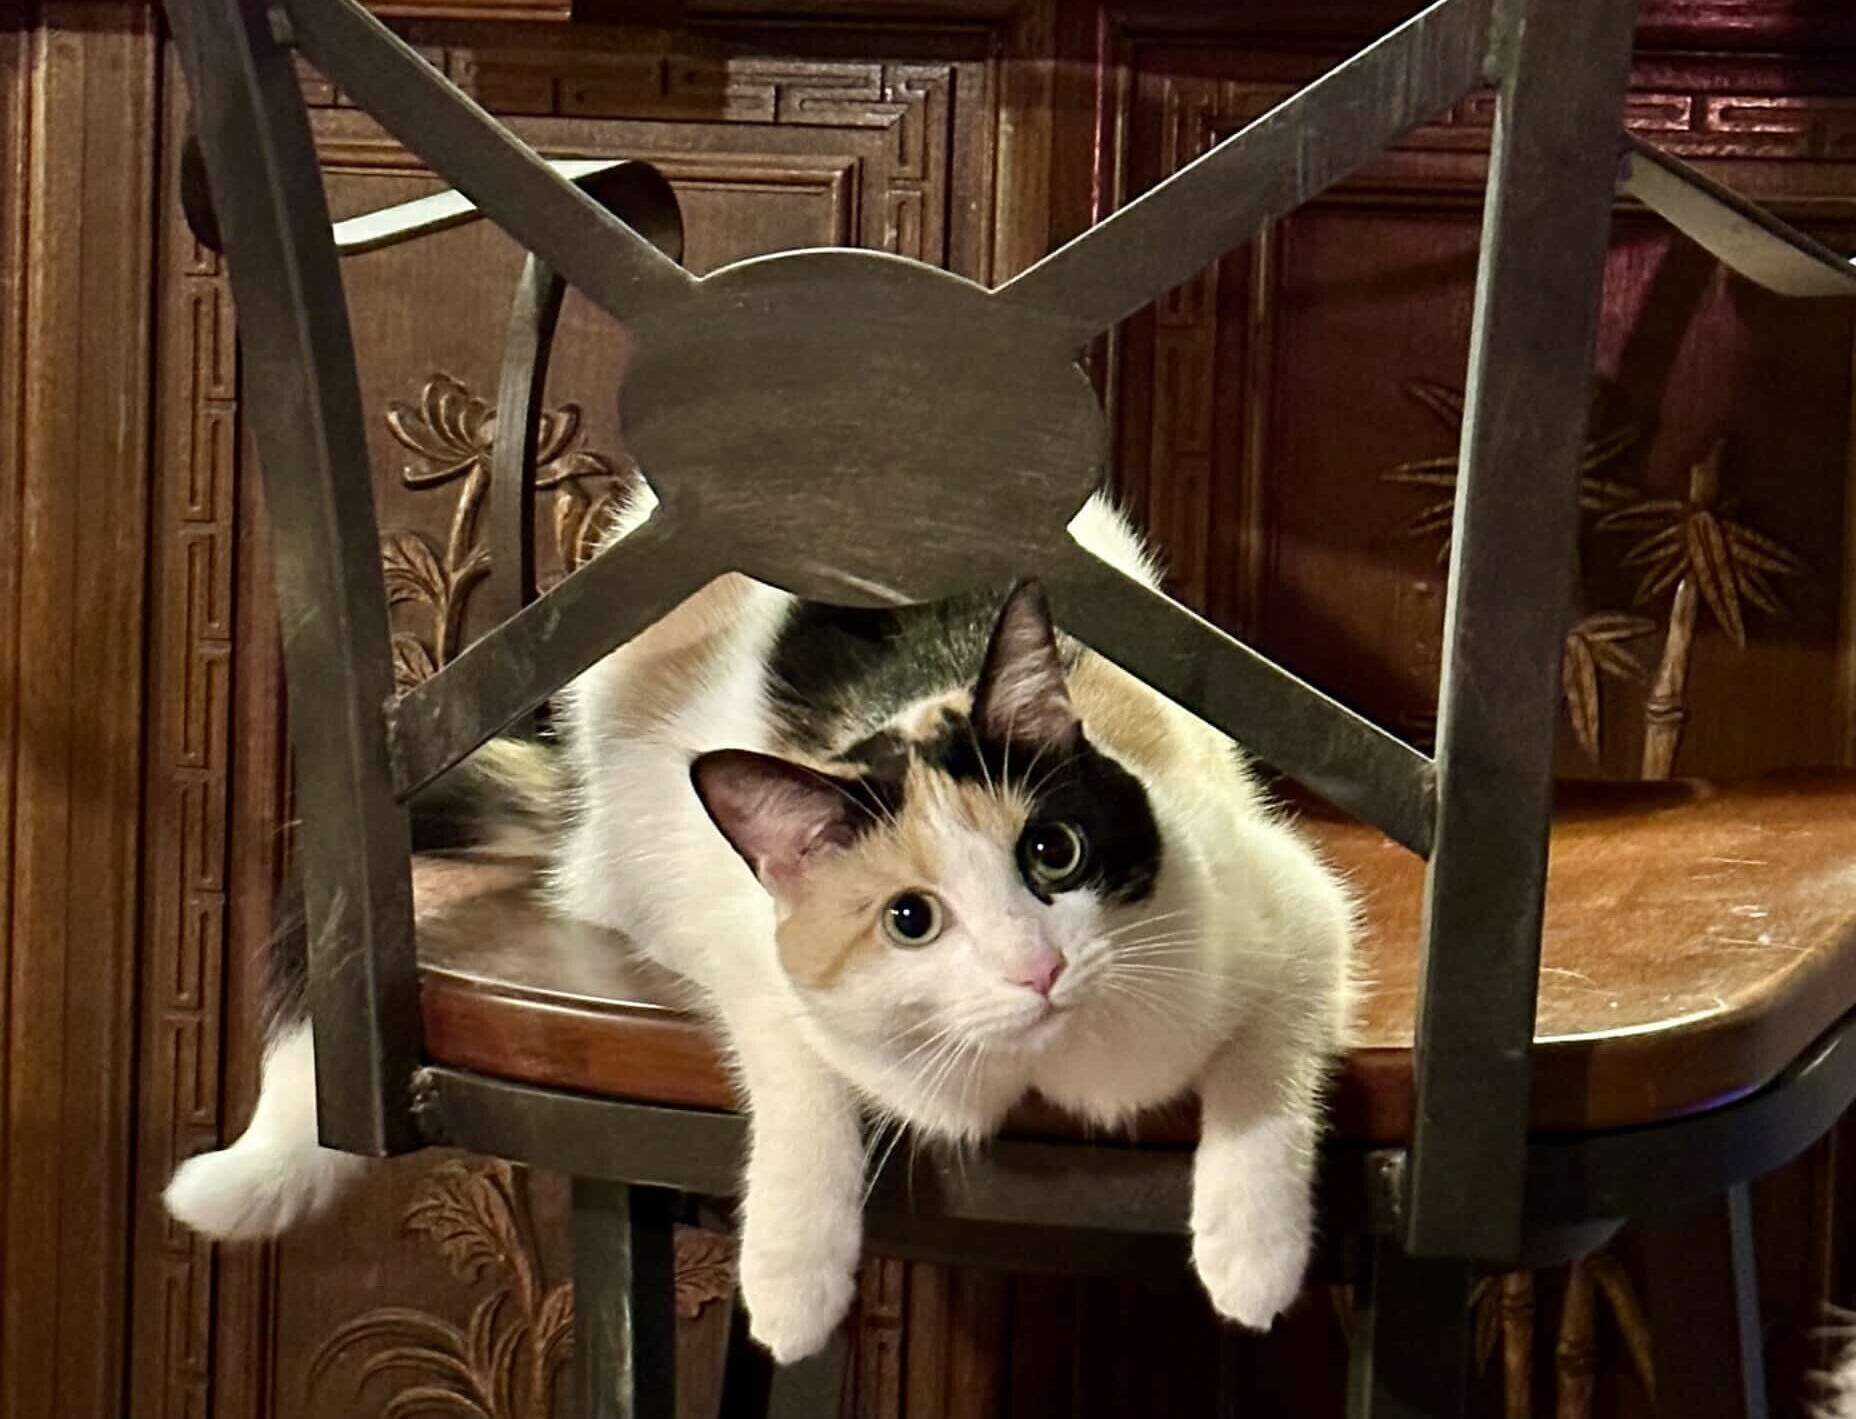 Ginger, a white, black and tan cat, sits on a barstool looking under the back of the stool.